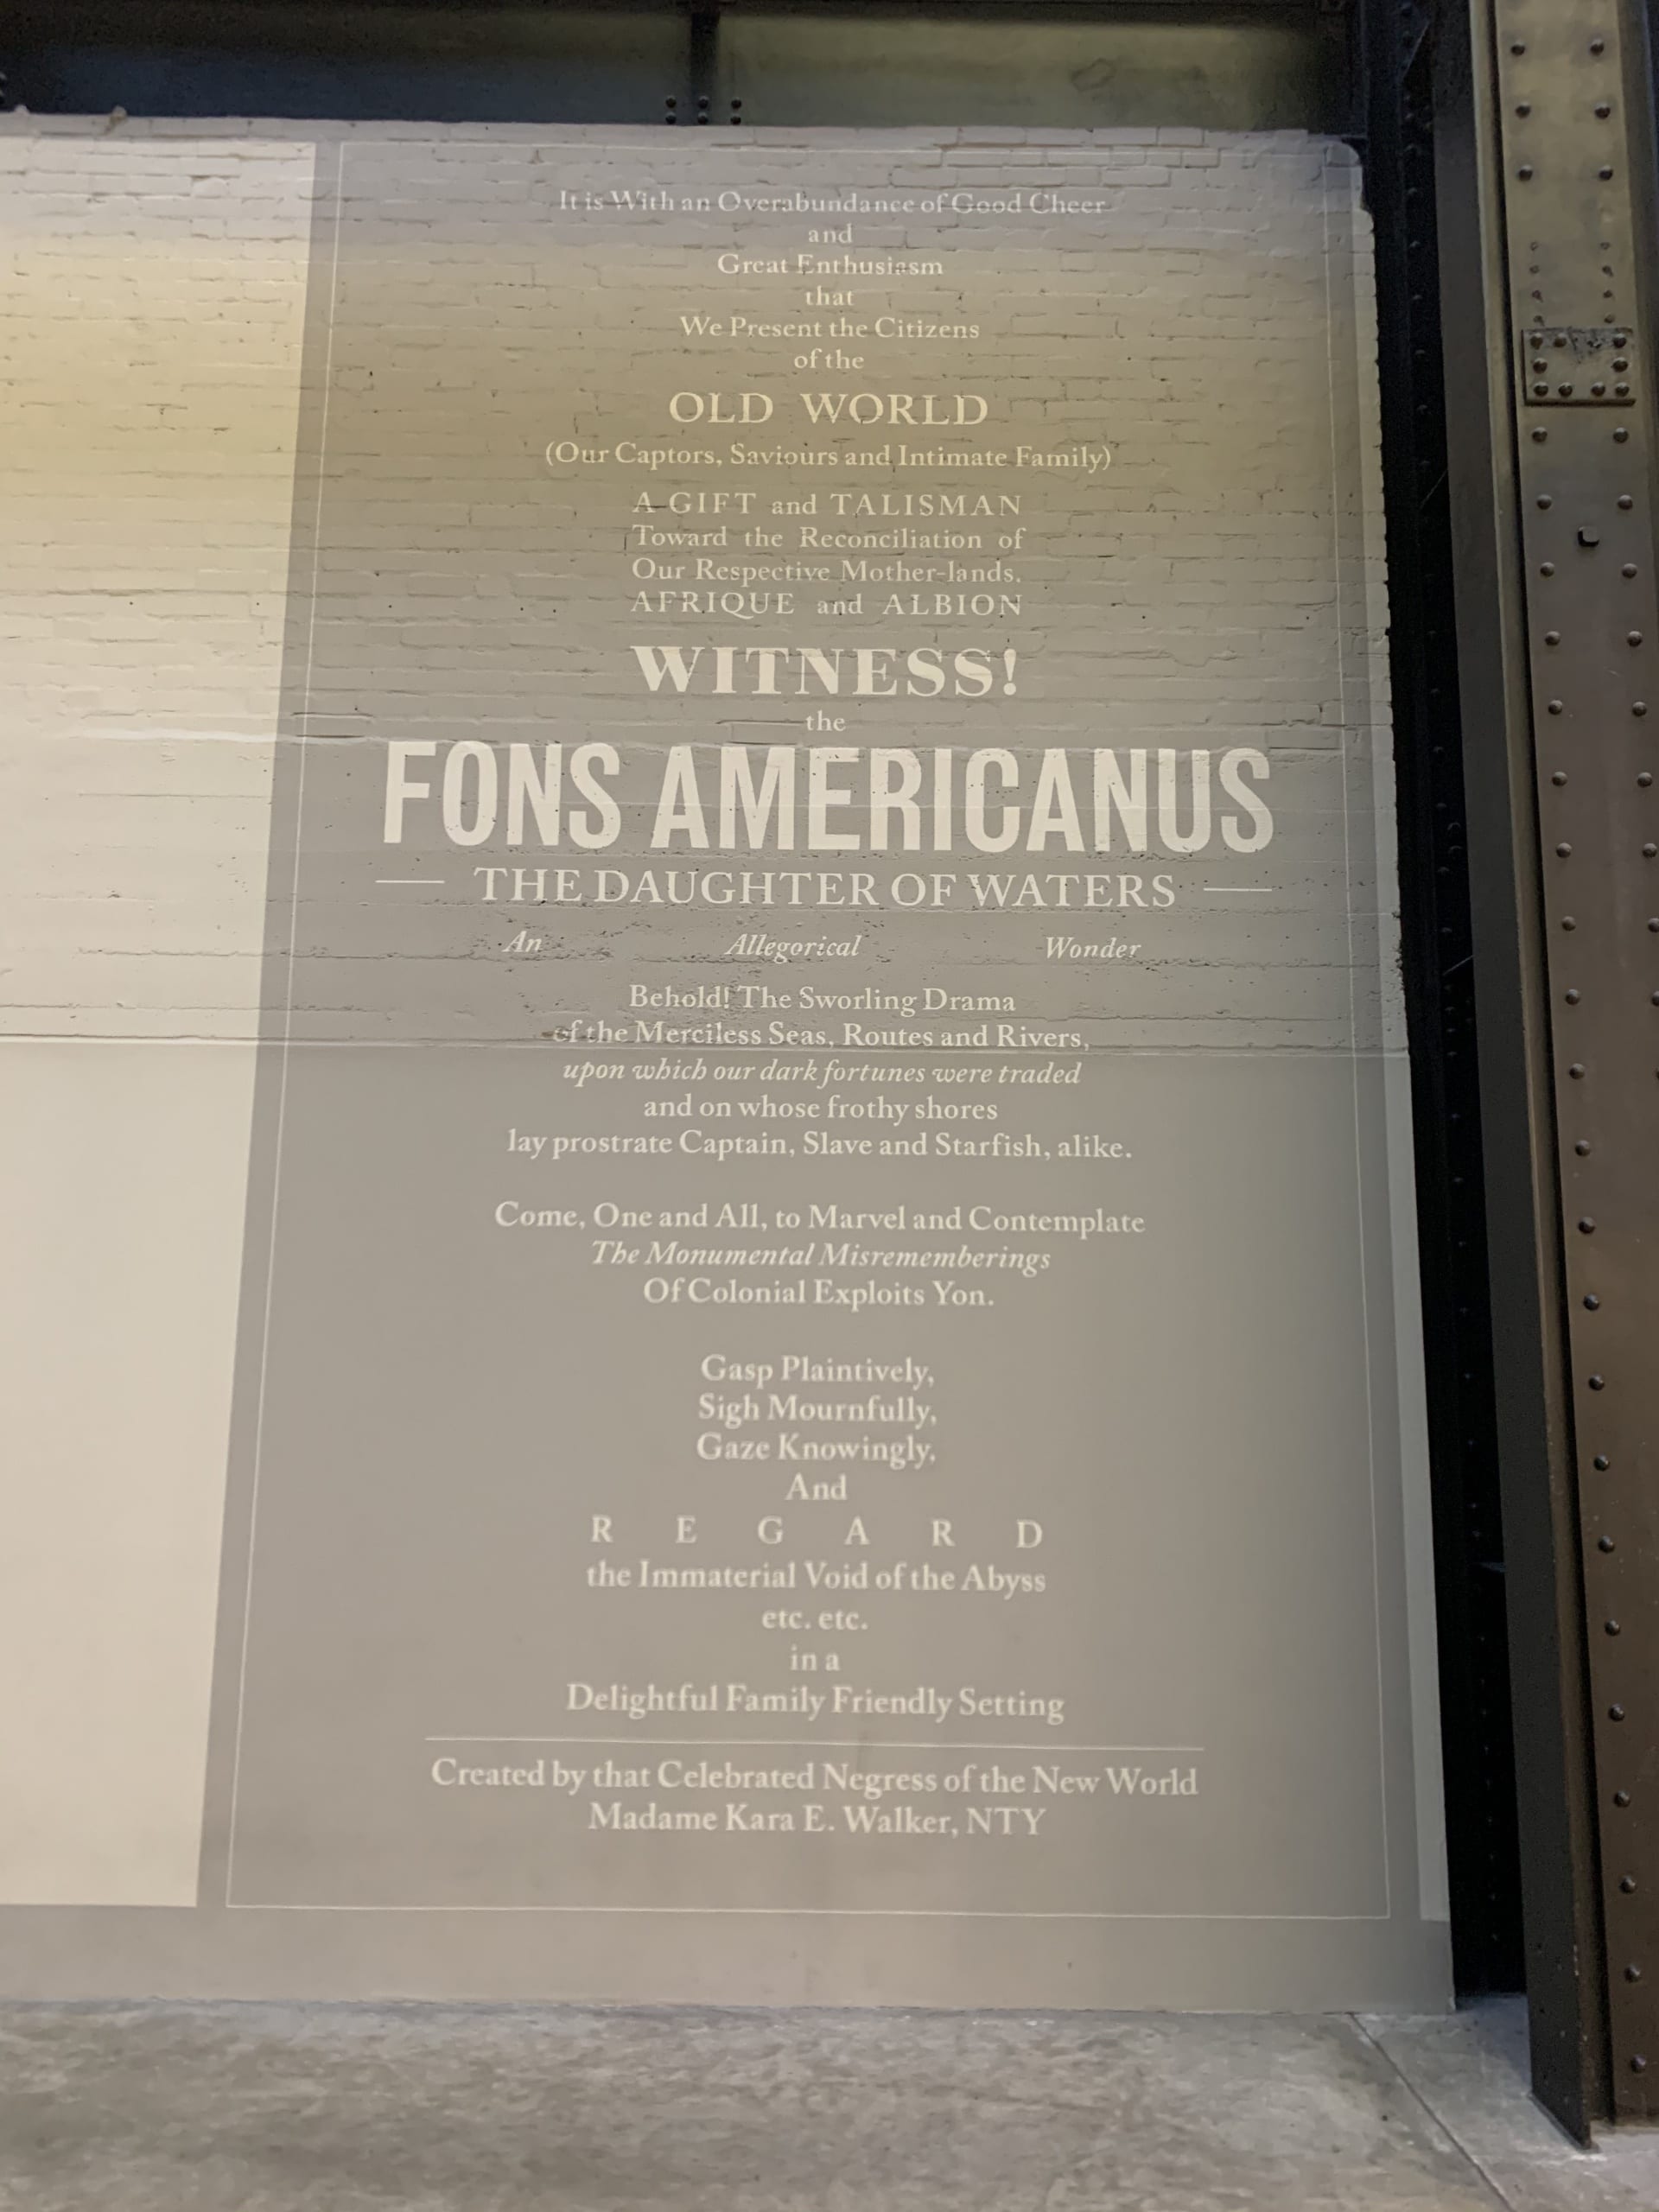 Walker’s statement “Fons Americanus: The Daughter of Waters” ….text on a wall